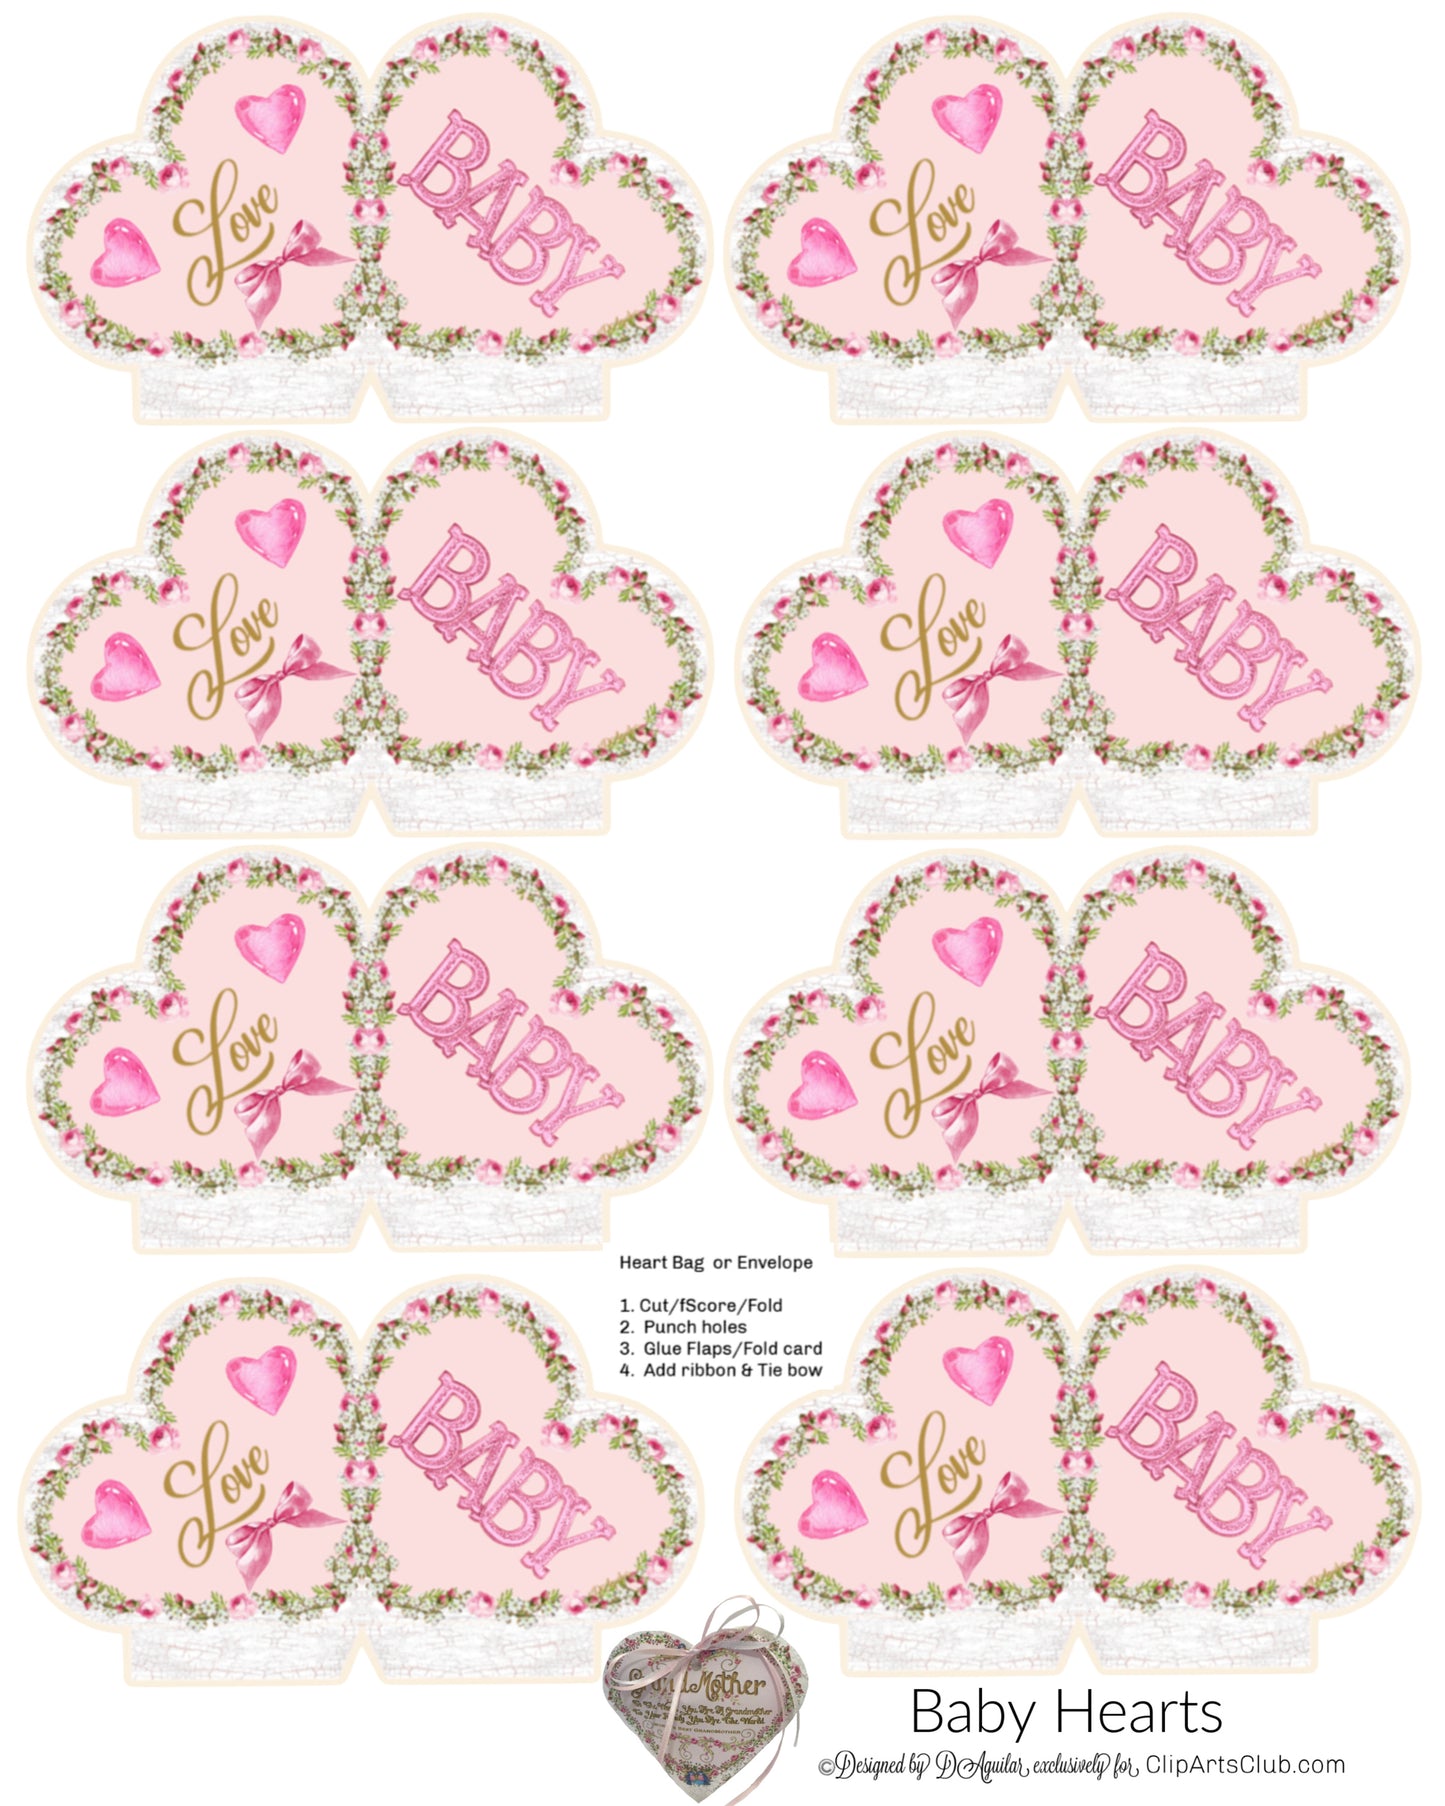 Baby Hearts - Tiny Pink foldable hearts make tiny bags or puffy hearts to decorate with